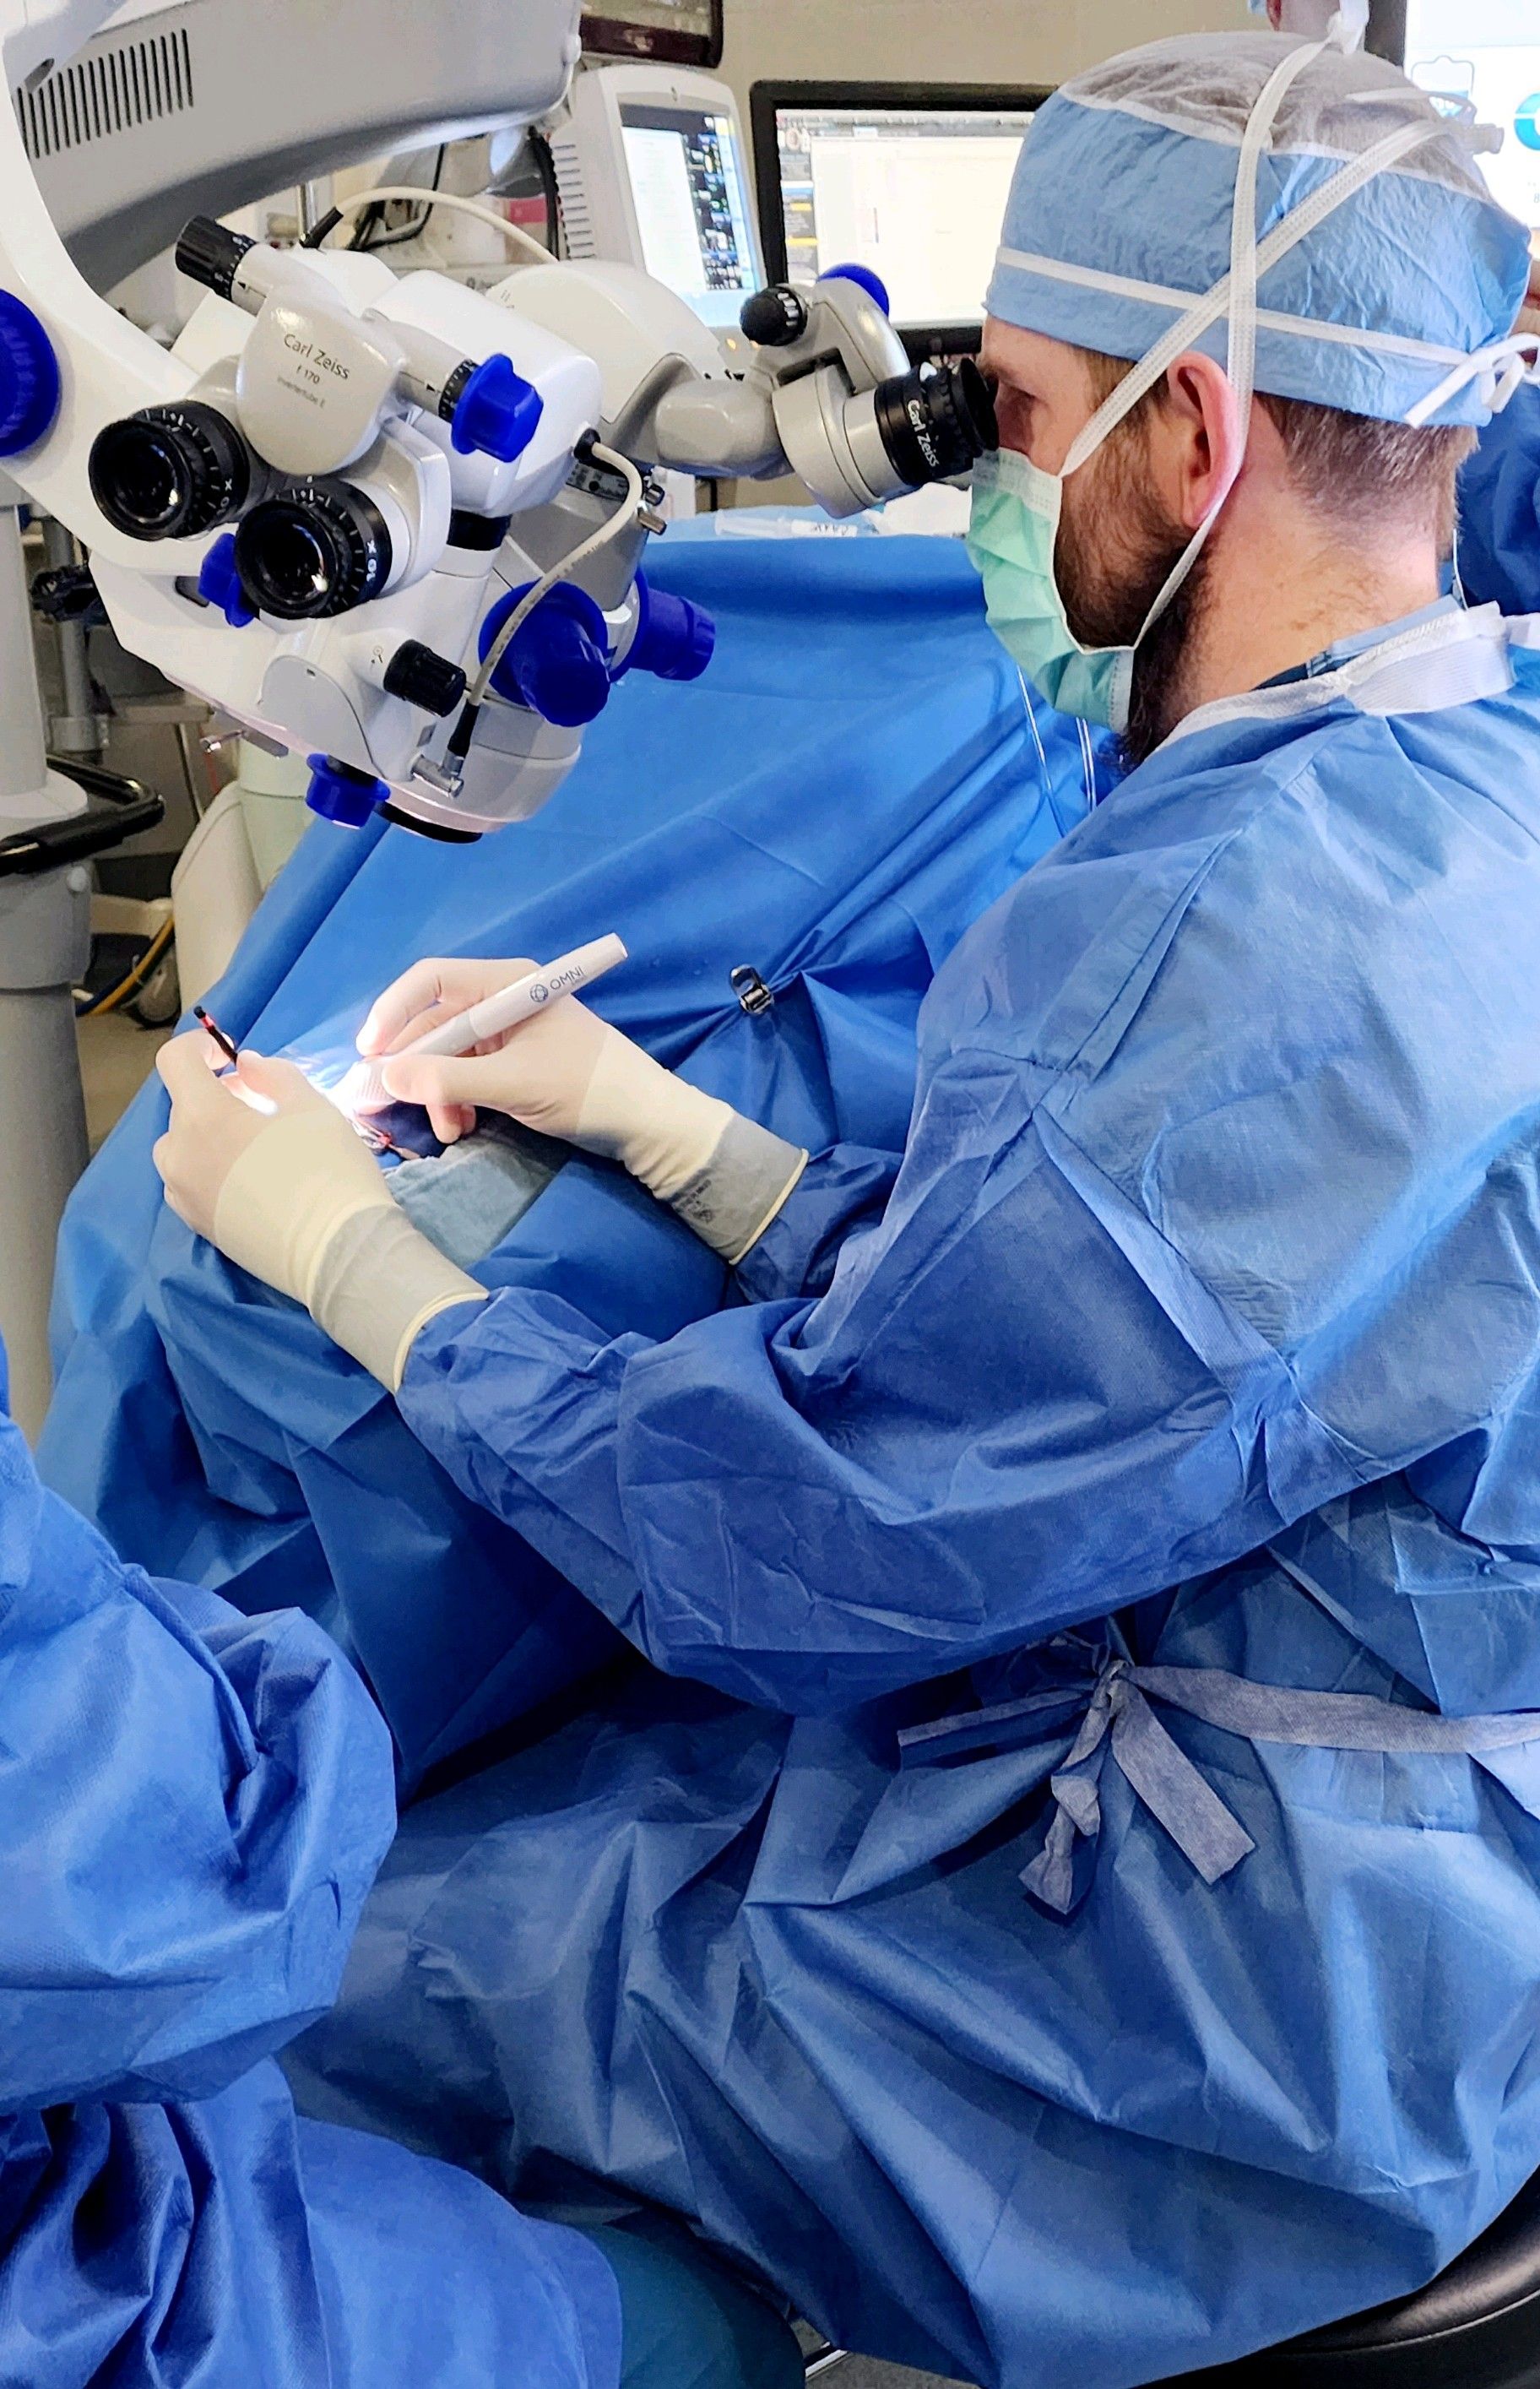 the surgical system can be used before, in combination with, or following cataract surgery. (Image courtesy of Joshua Olson, MD, comprehensive ophthalmologist, University of Minnesota)